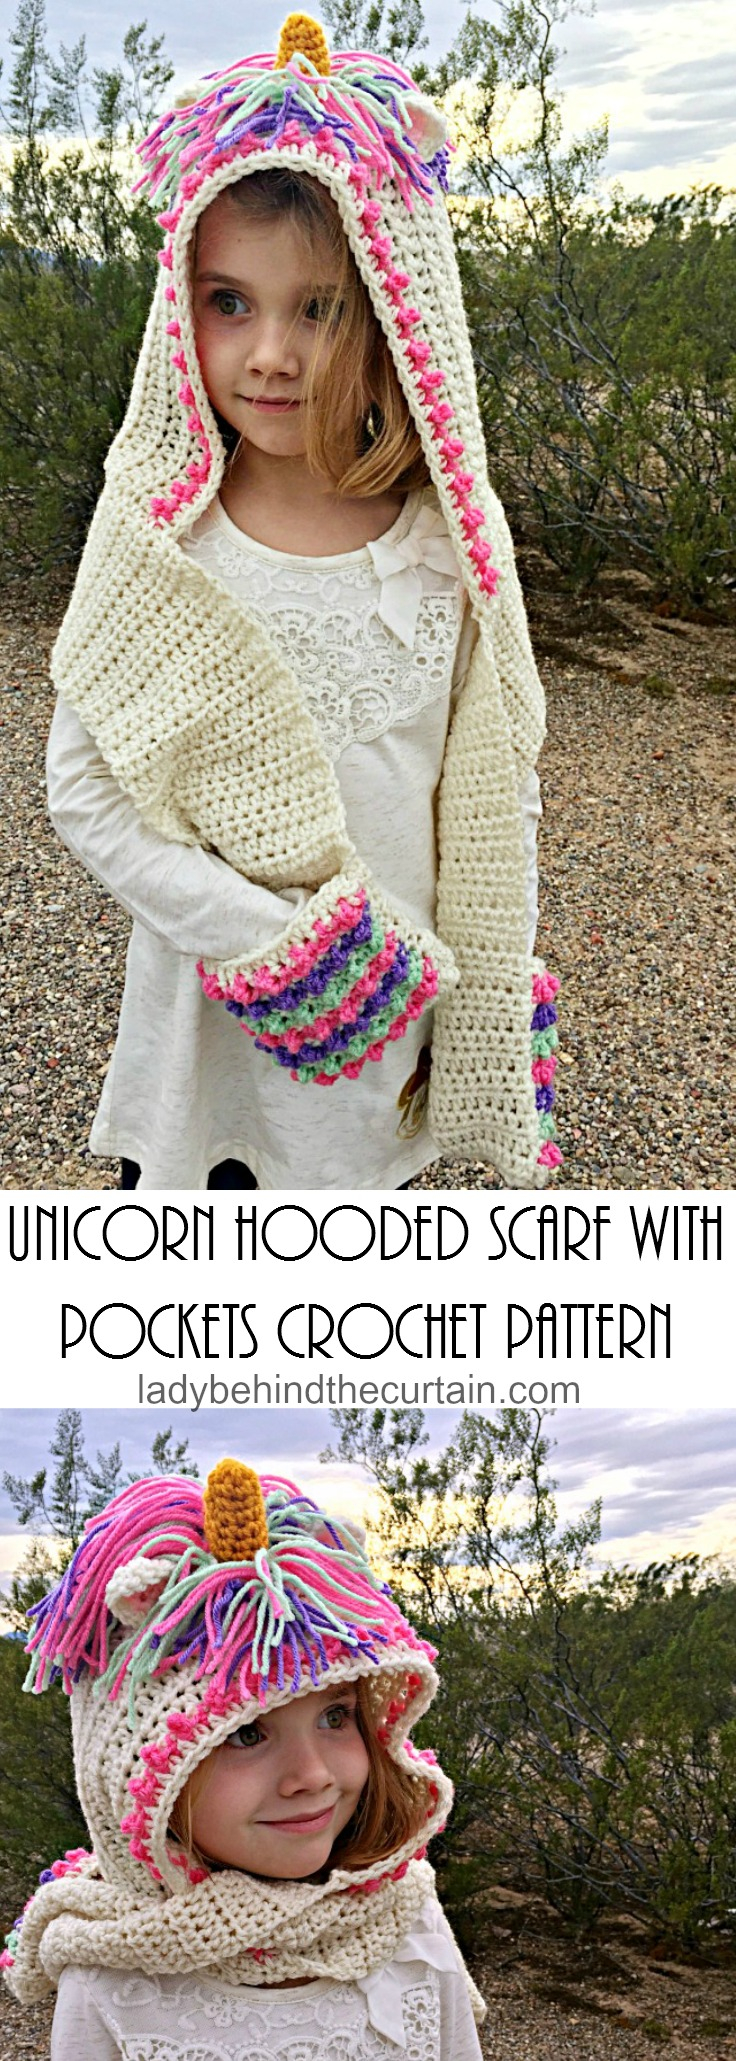 Knitted Hood Scarf Pattern Unicorn Hooded Scarf With Pockets Crochet Pattern